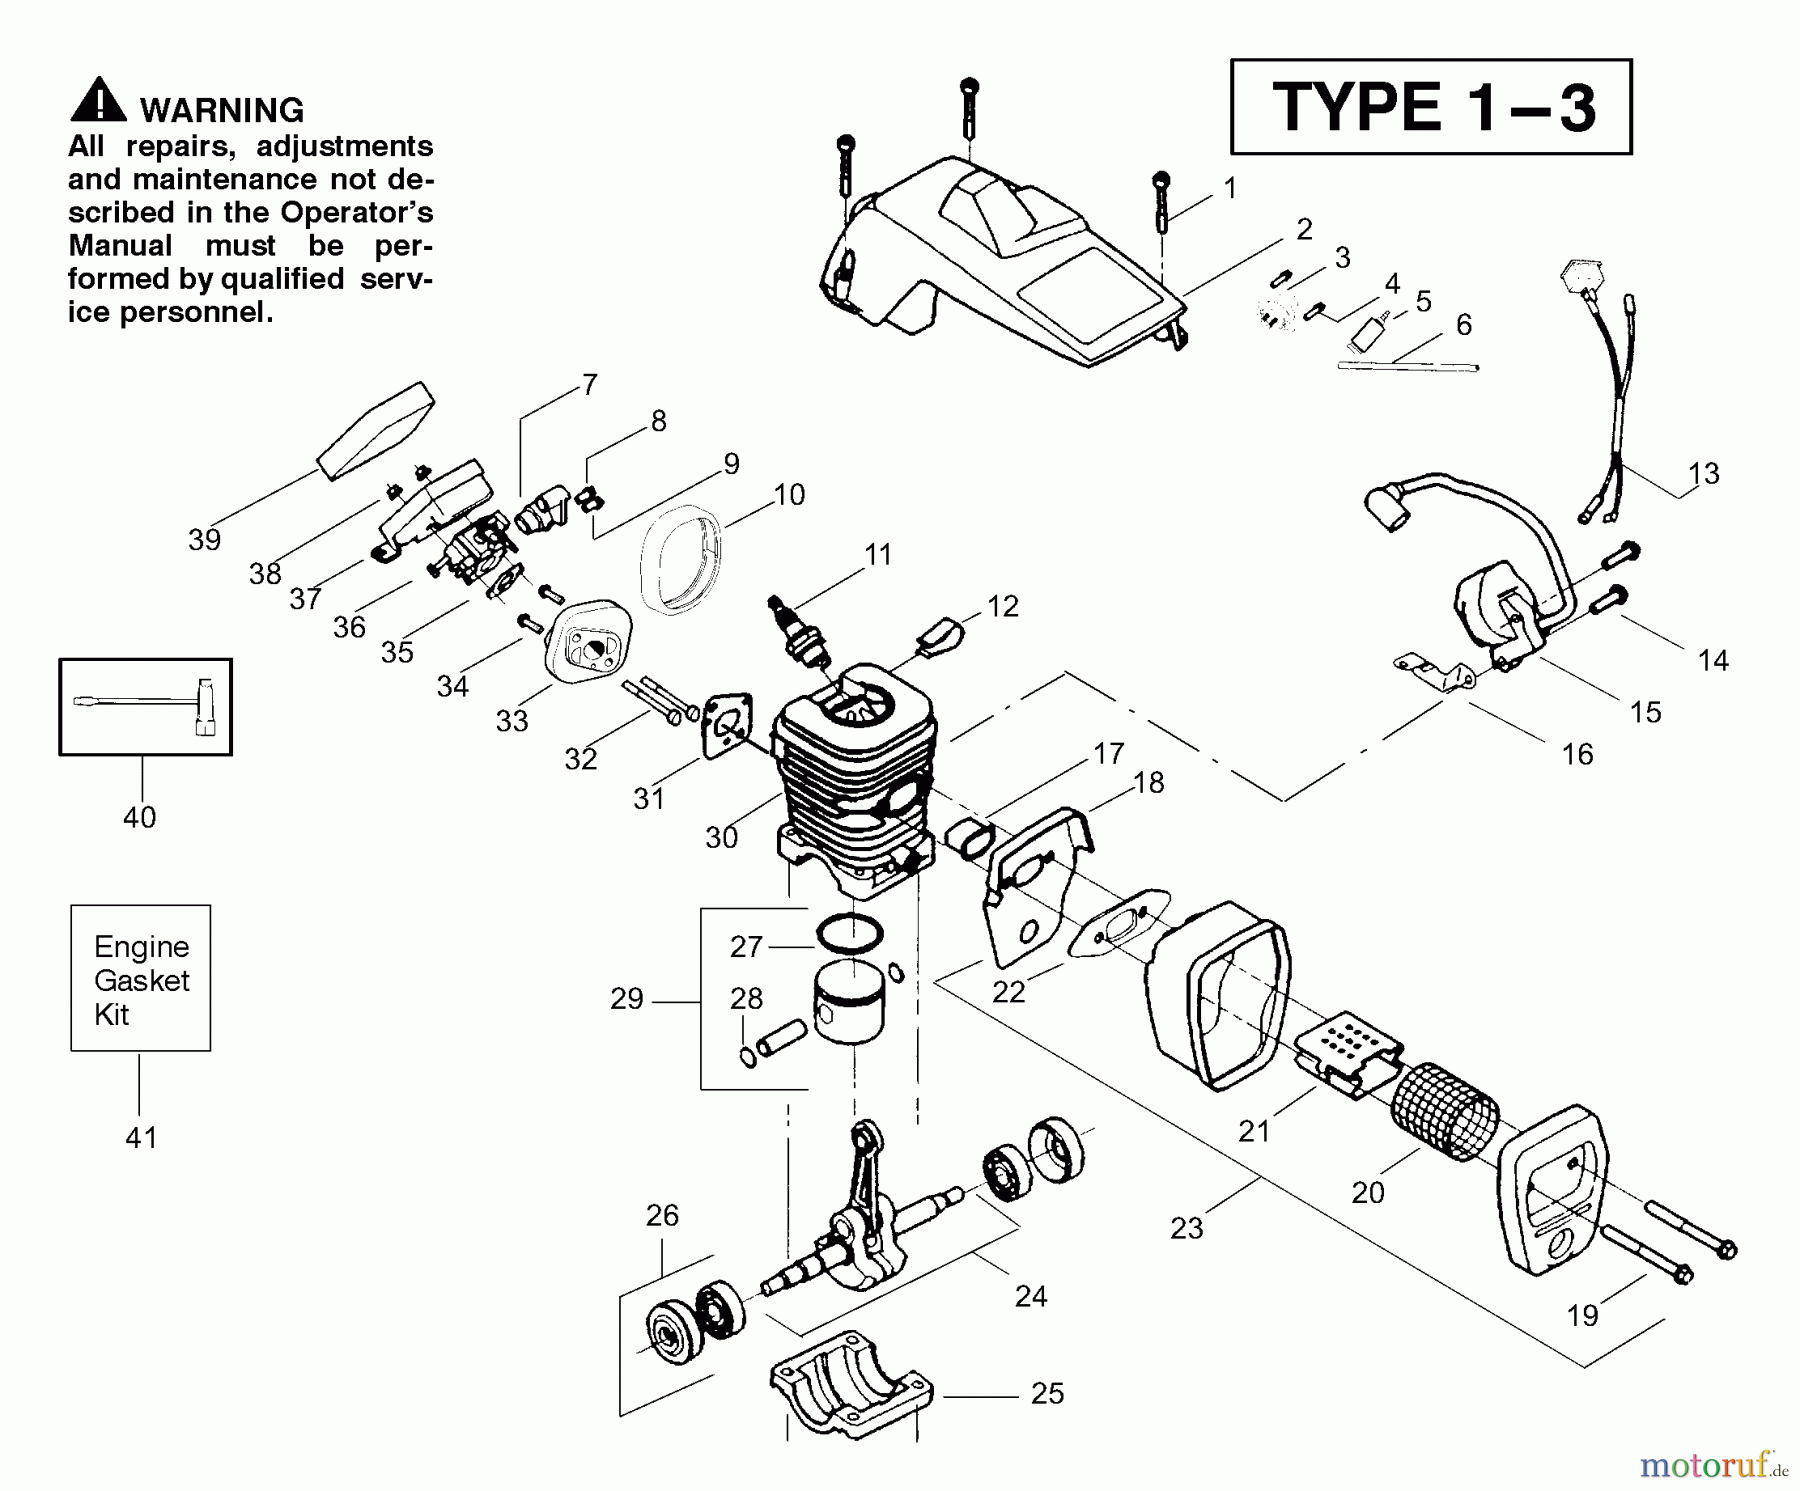  Poulan / Weed Eater Motorsägen PP221 (Type 3) - Poulan Pro Chainsaw Engine Assembly Type 1-3